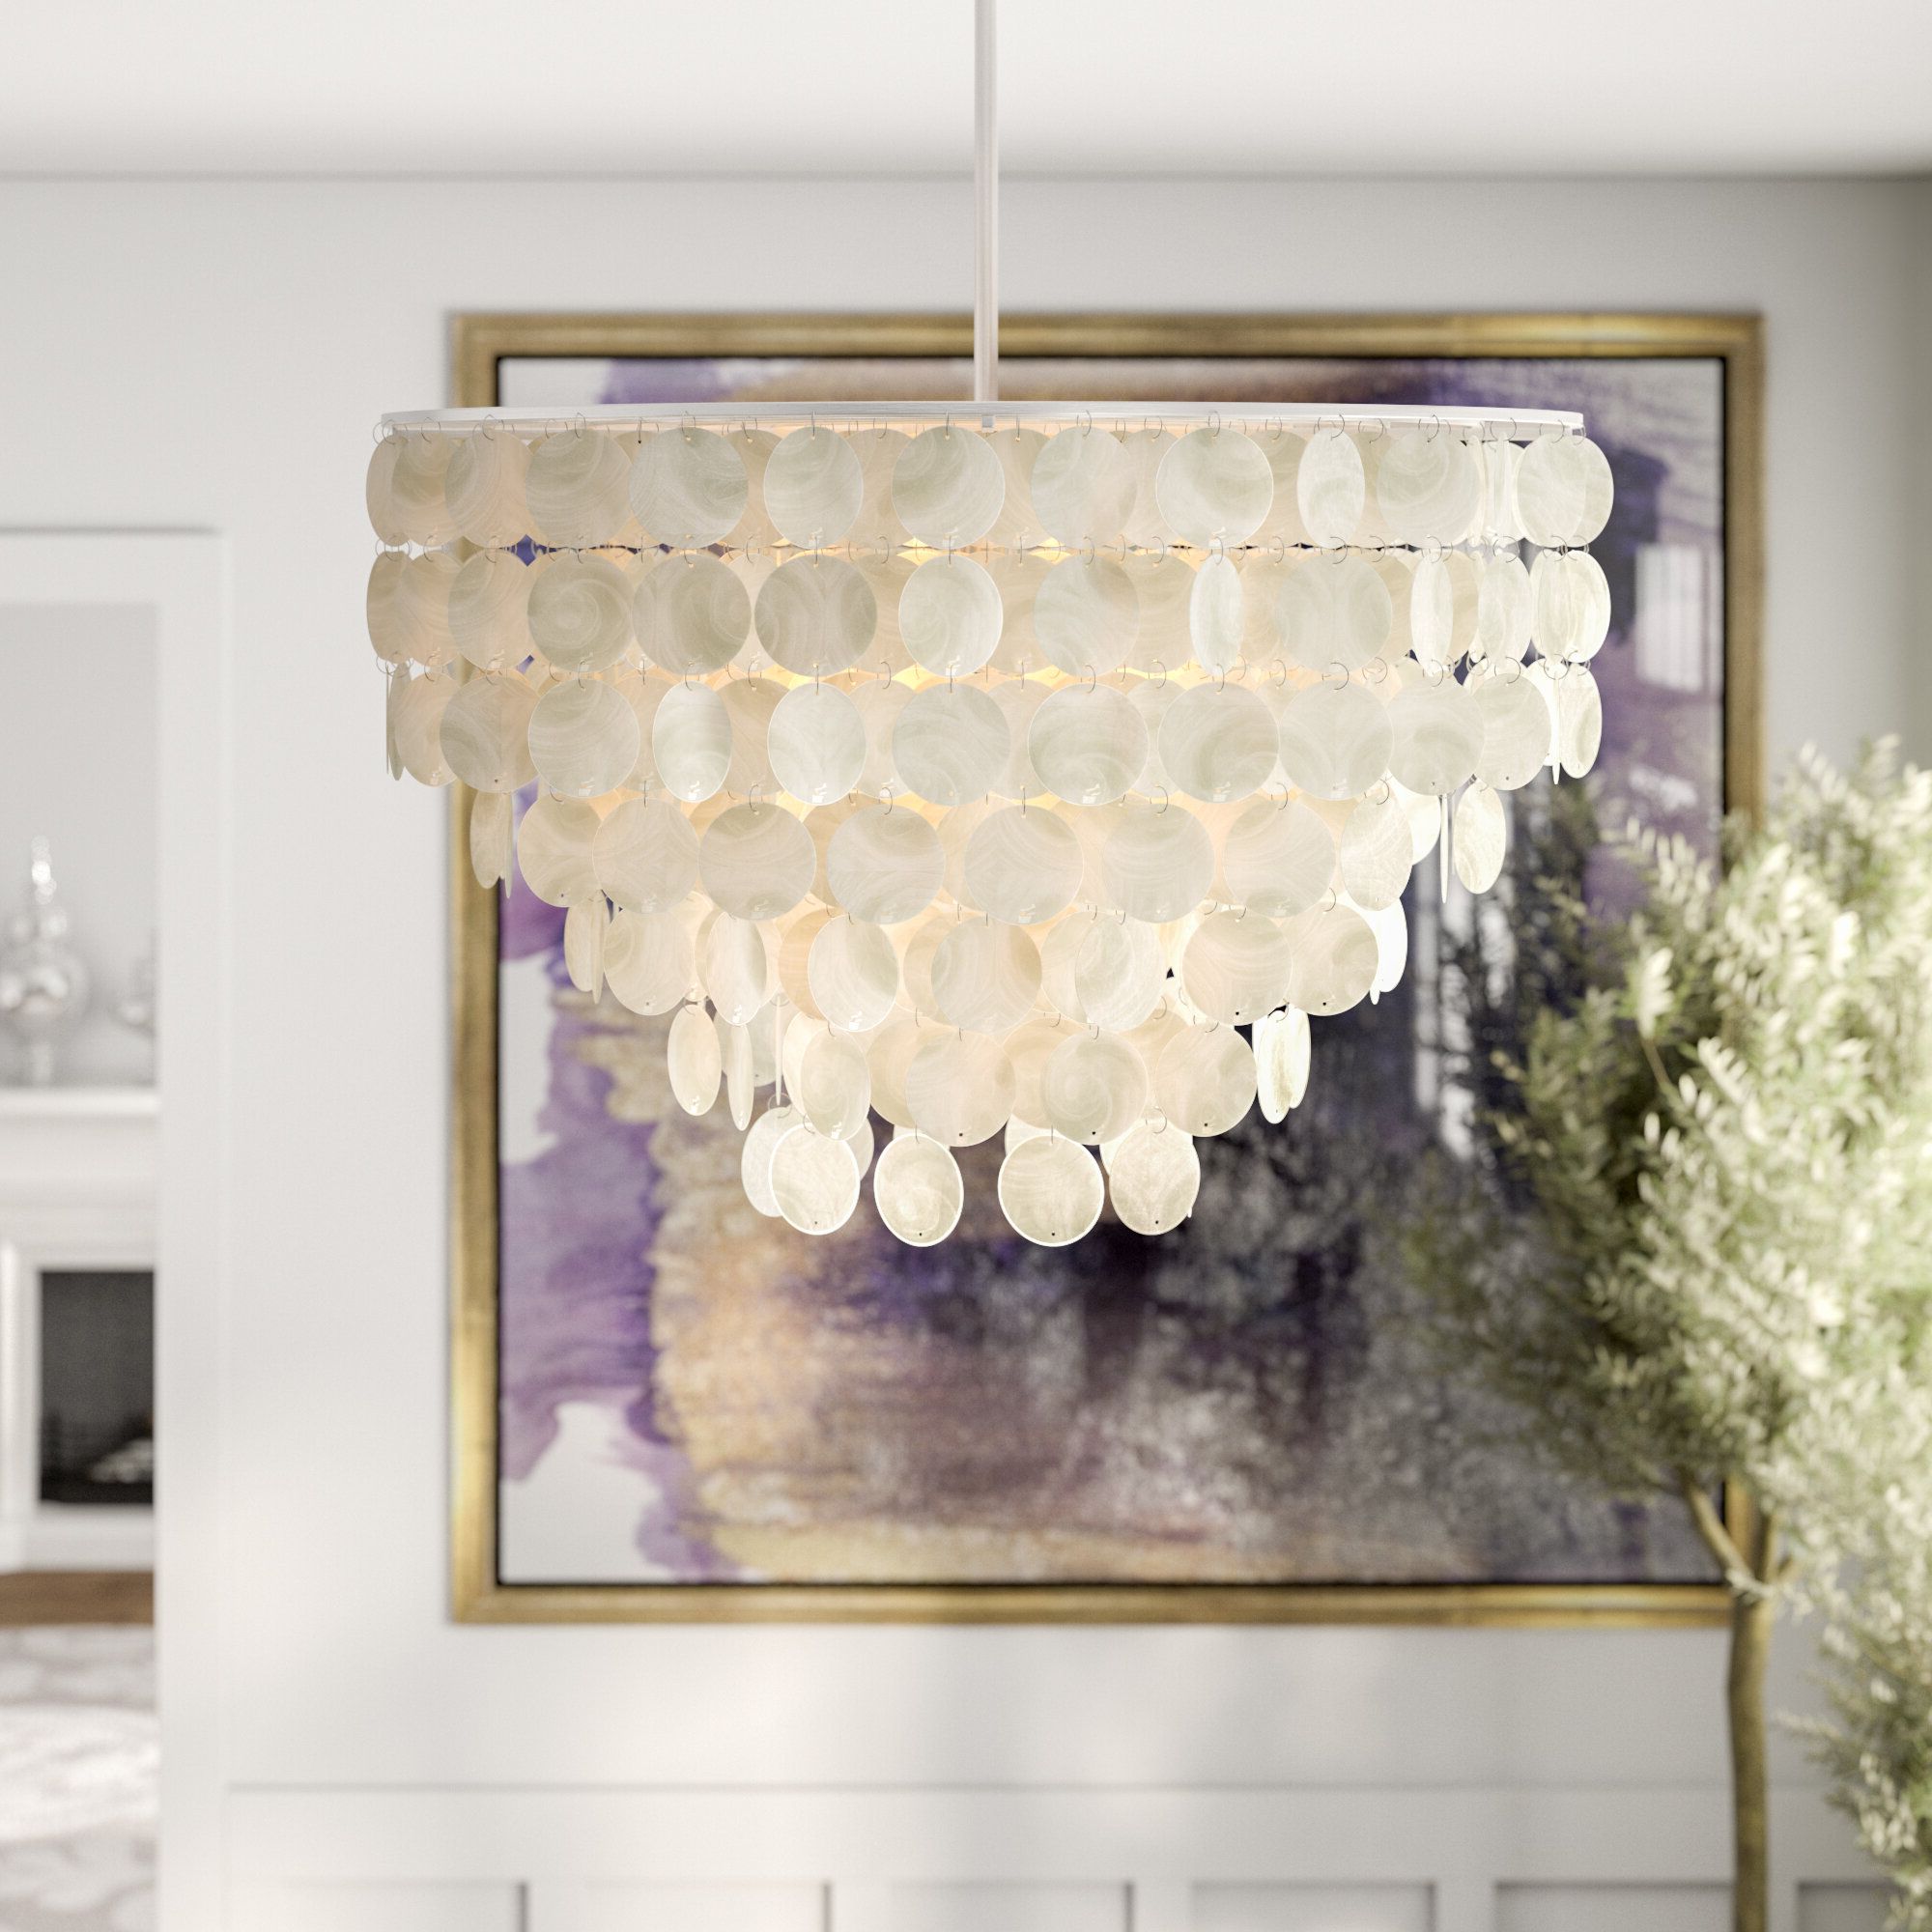 Bramers 6 Light Novelty Chandeliers With Preferred Henry 6 Light Crystal Chandelier (View 8 of 25)